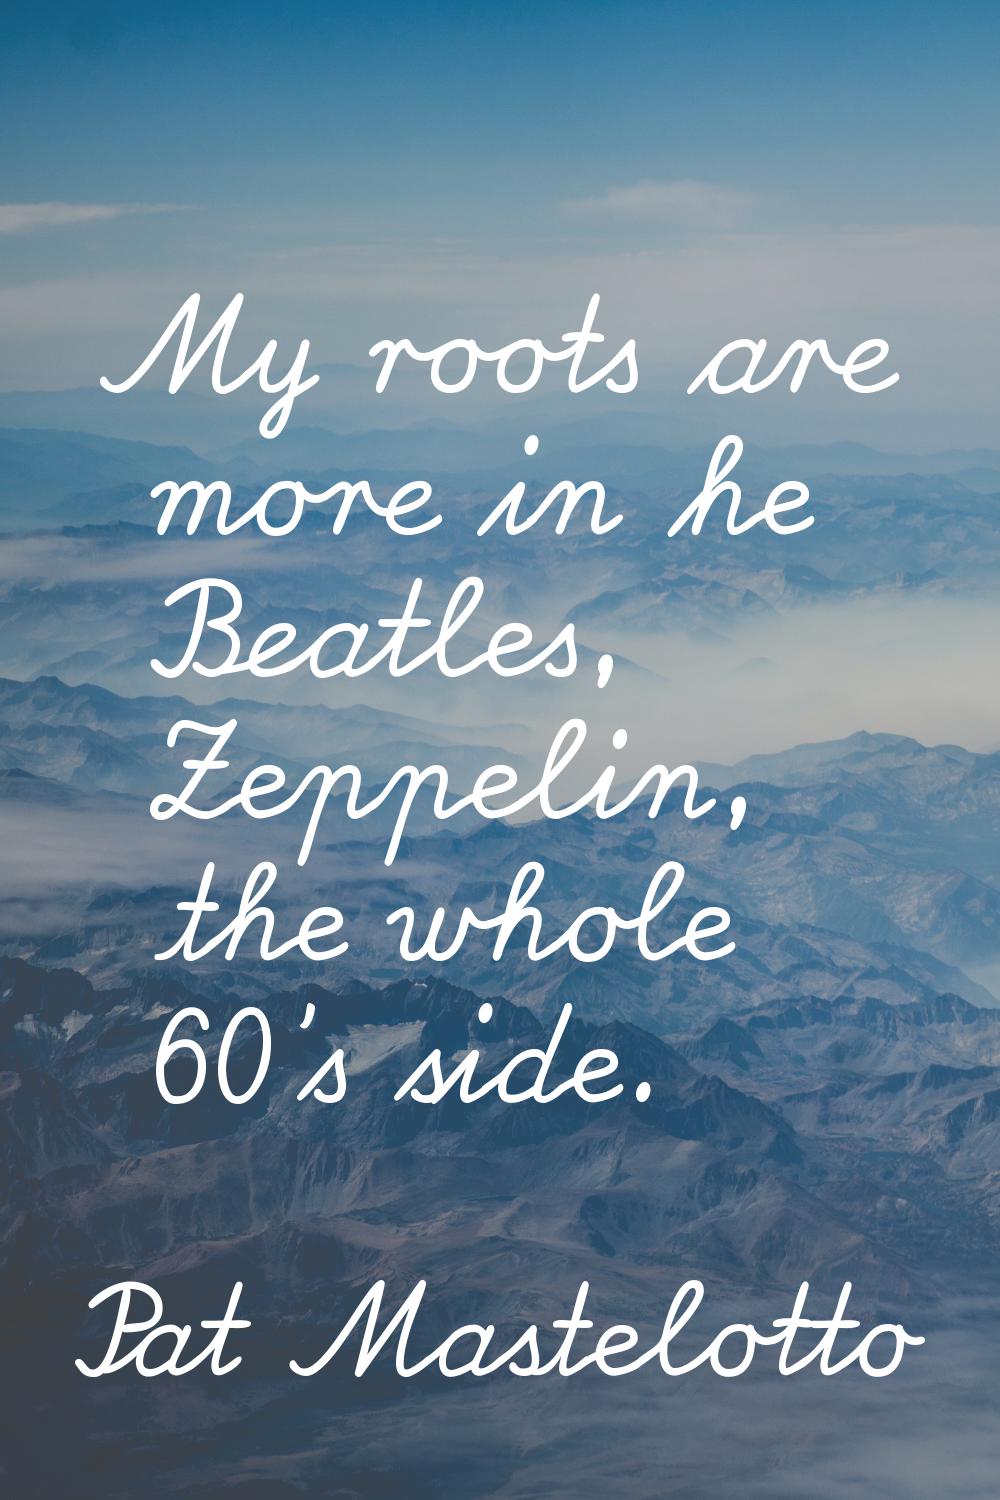 My roots are more in he Beatles, Zeppelin, the whole 60's side.